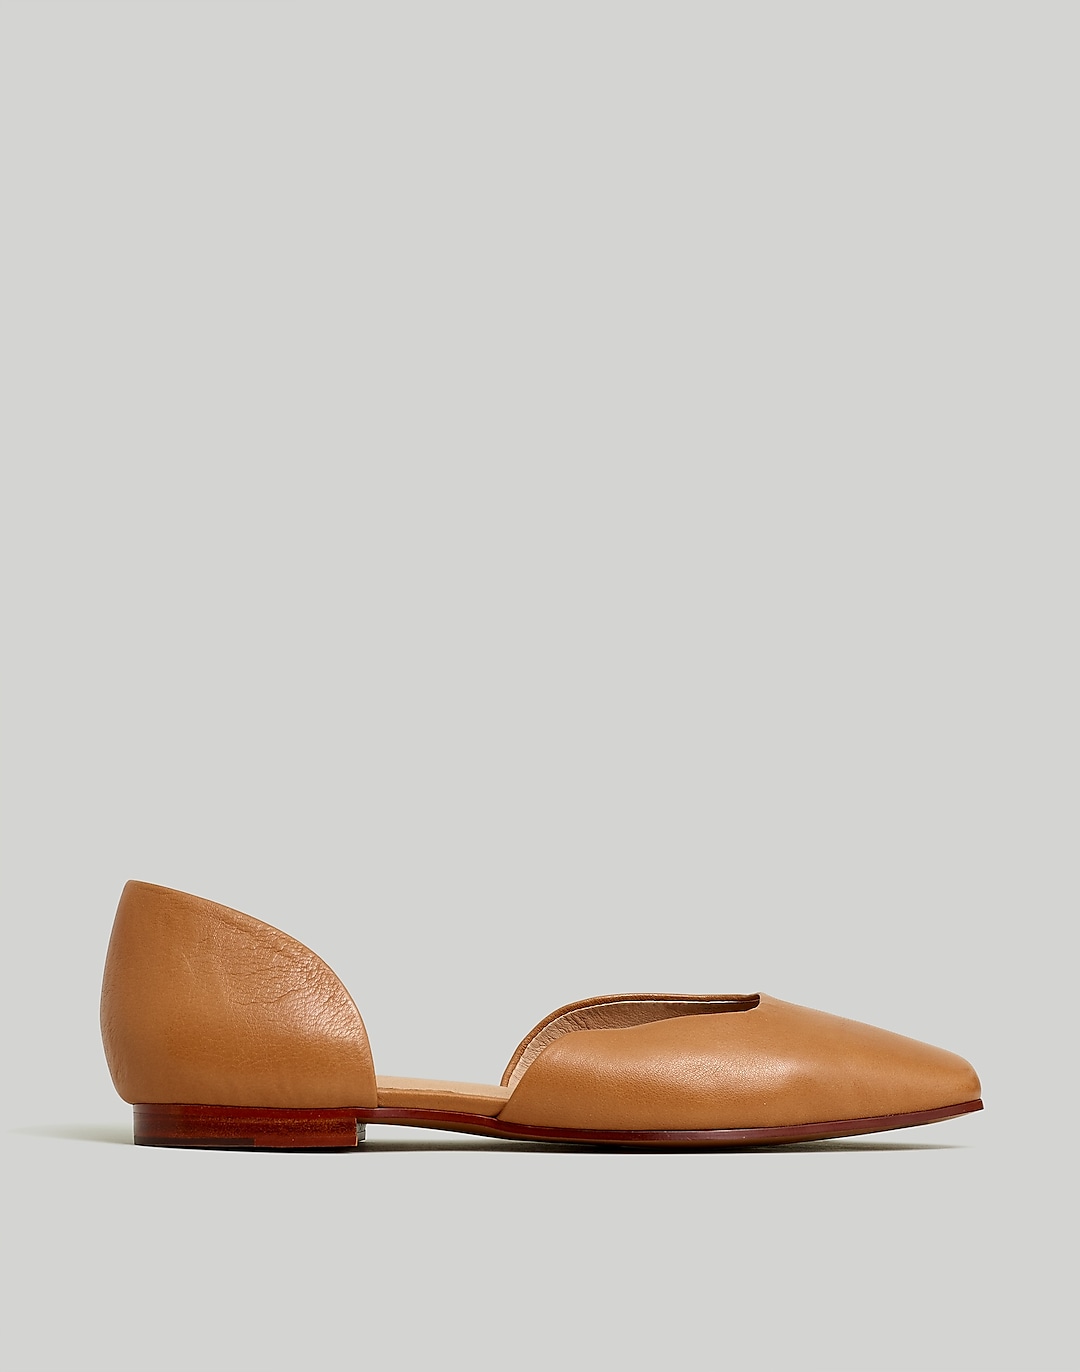 The Lawrence d'Orsay Flat | Madewell